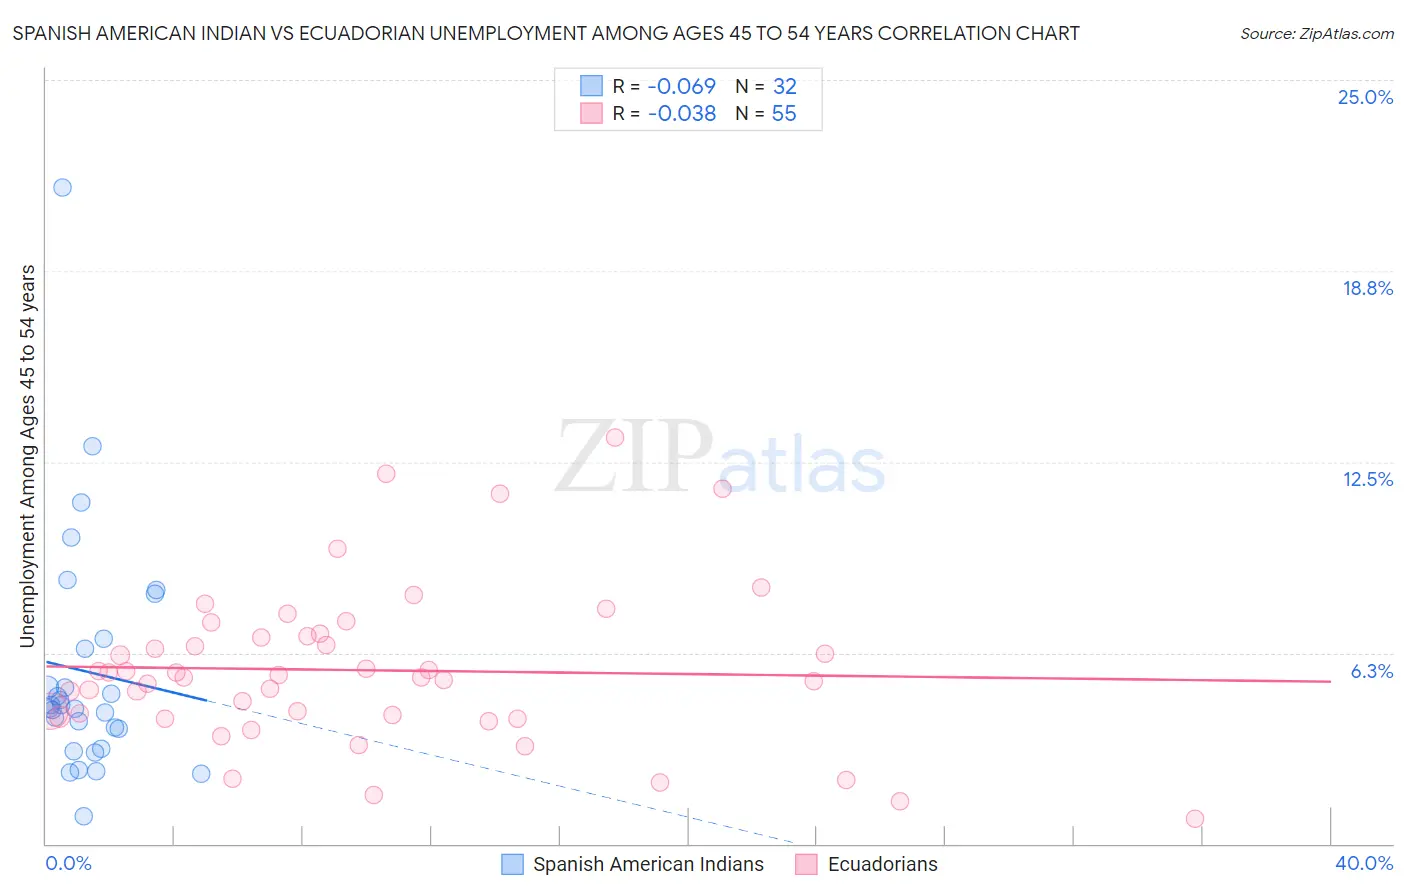 Spanish American Indian vs Ecuadorian Unemployment Among Ages 45 to 54 years